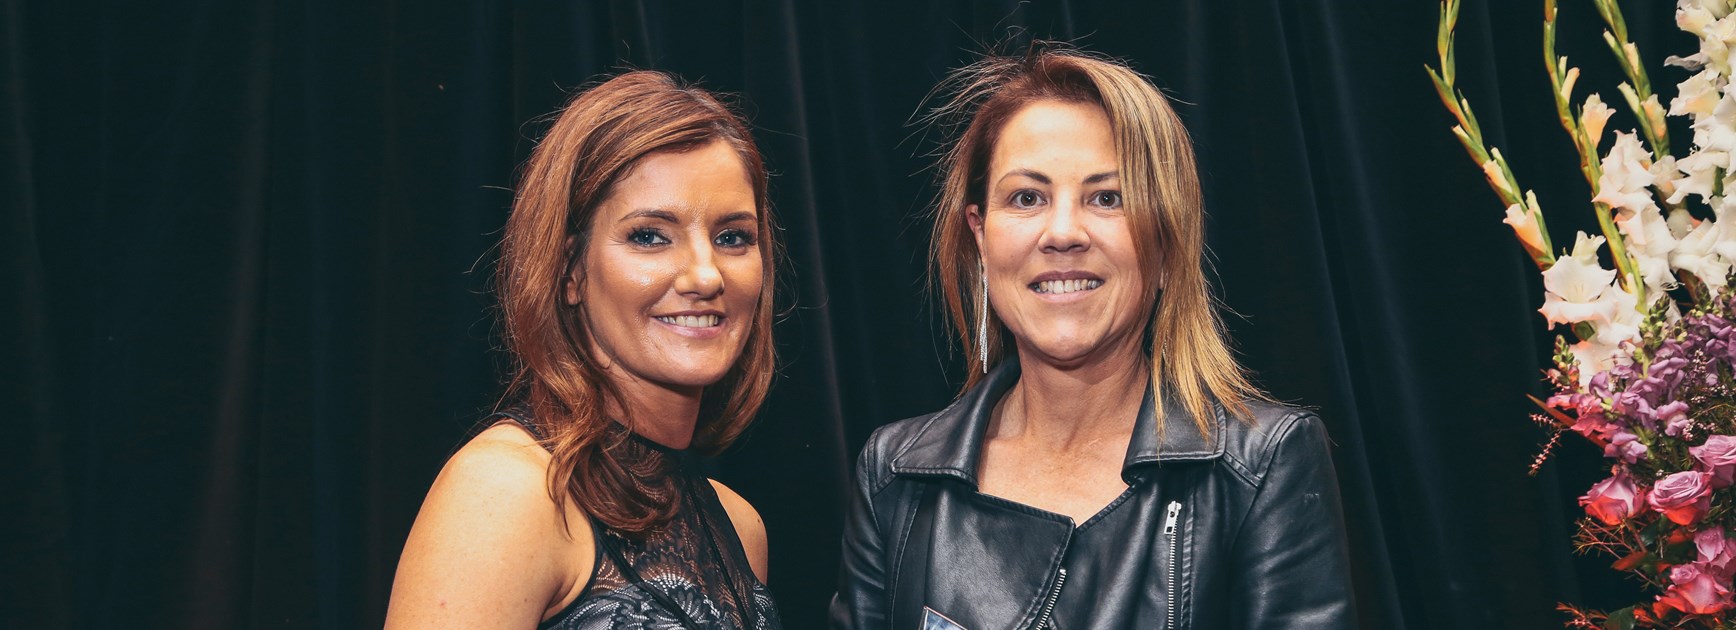 Liz Callaghan named 2019 Wests Tigers Woman of the Year Award